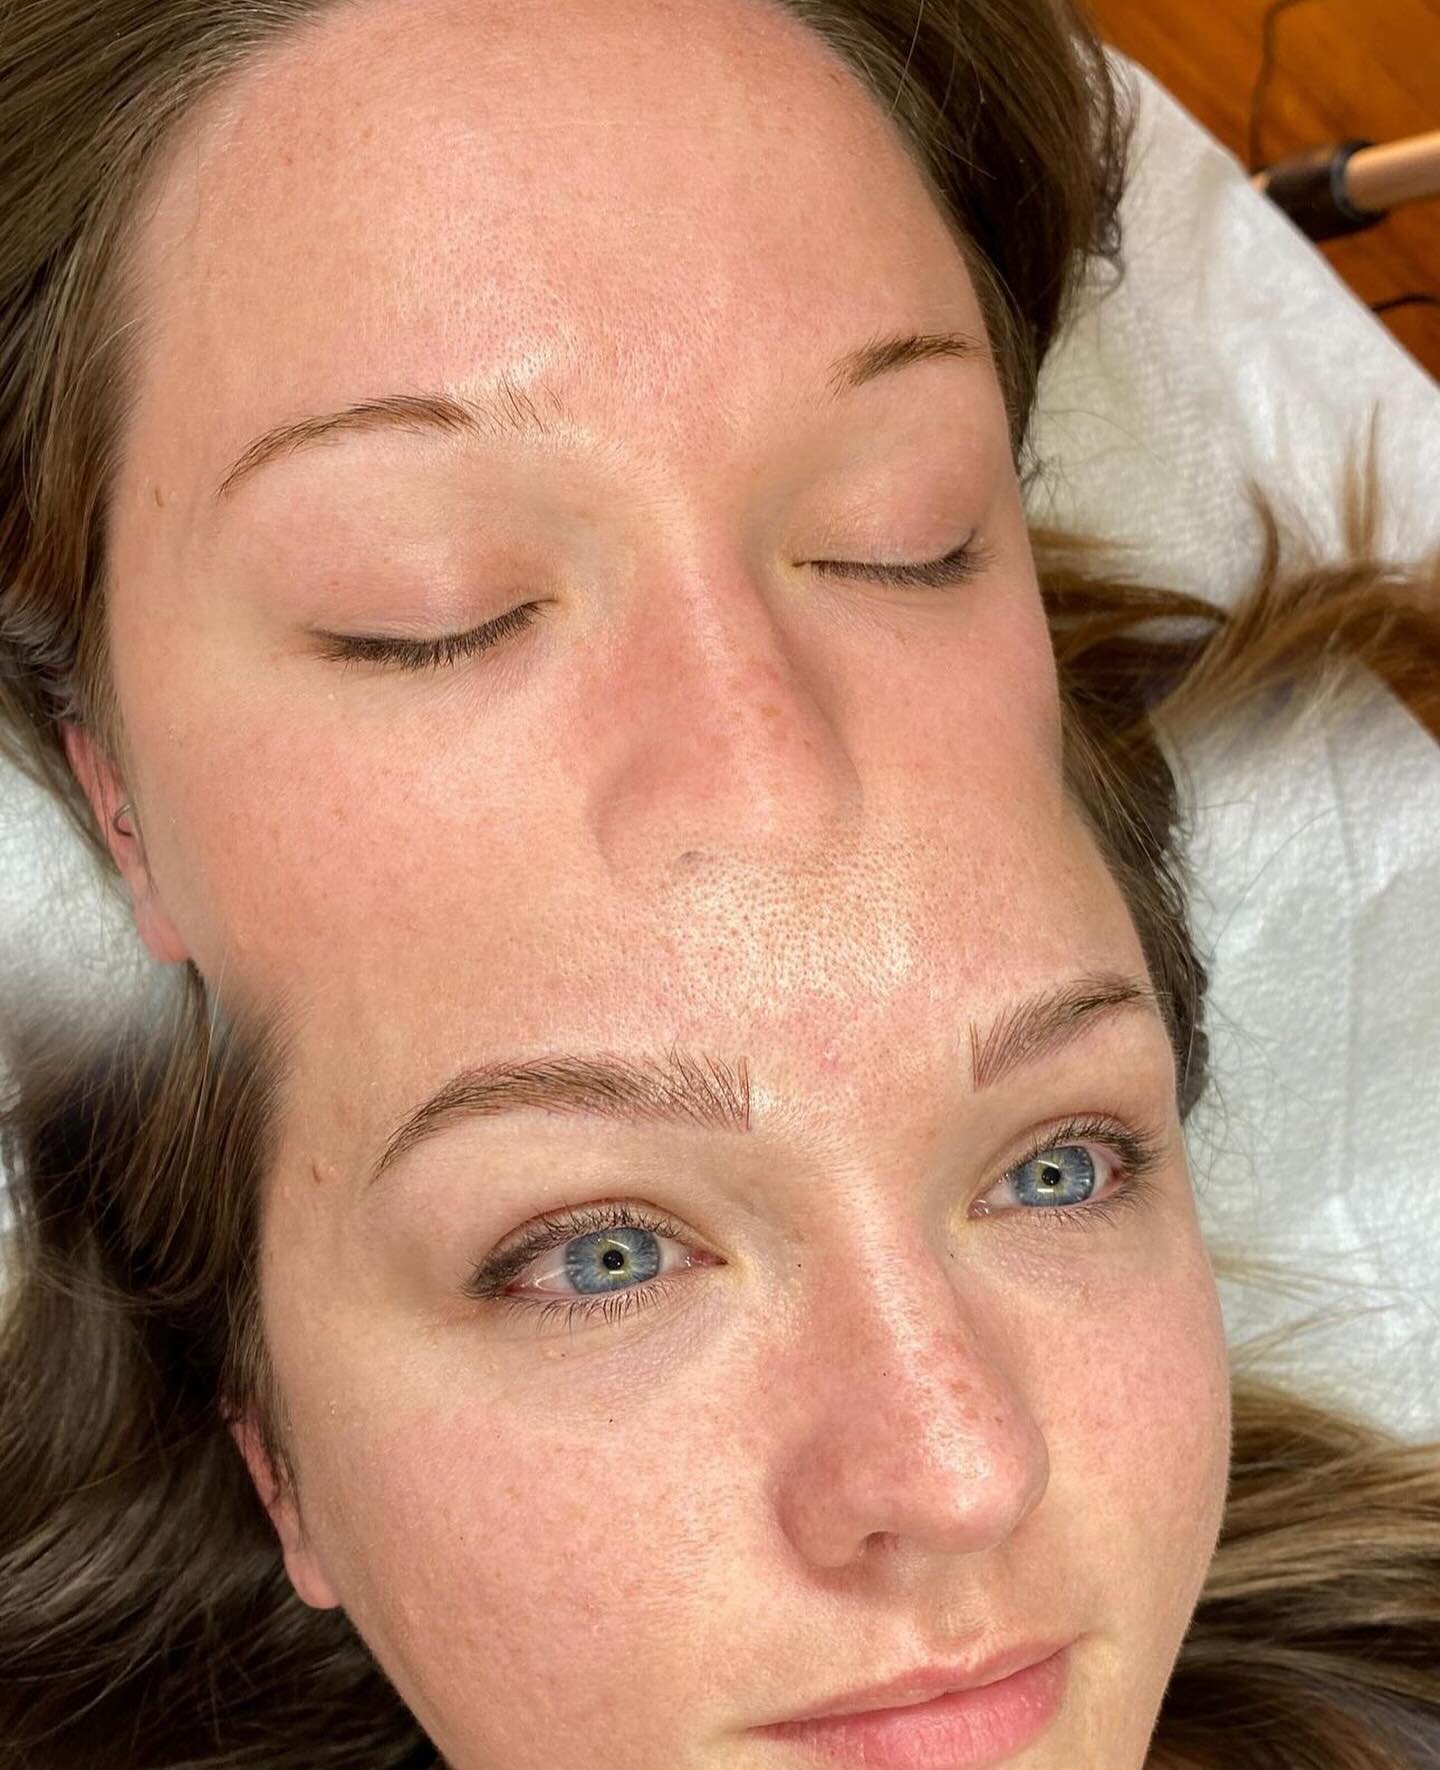 For this stunning clients first session, Shelby focused on crafting the perfect shape with microblading and enhancing depth with light shading. Stay tuned for session two where she will elevate the look with adding more texture and density. 

Artist: